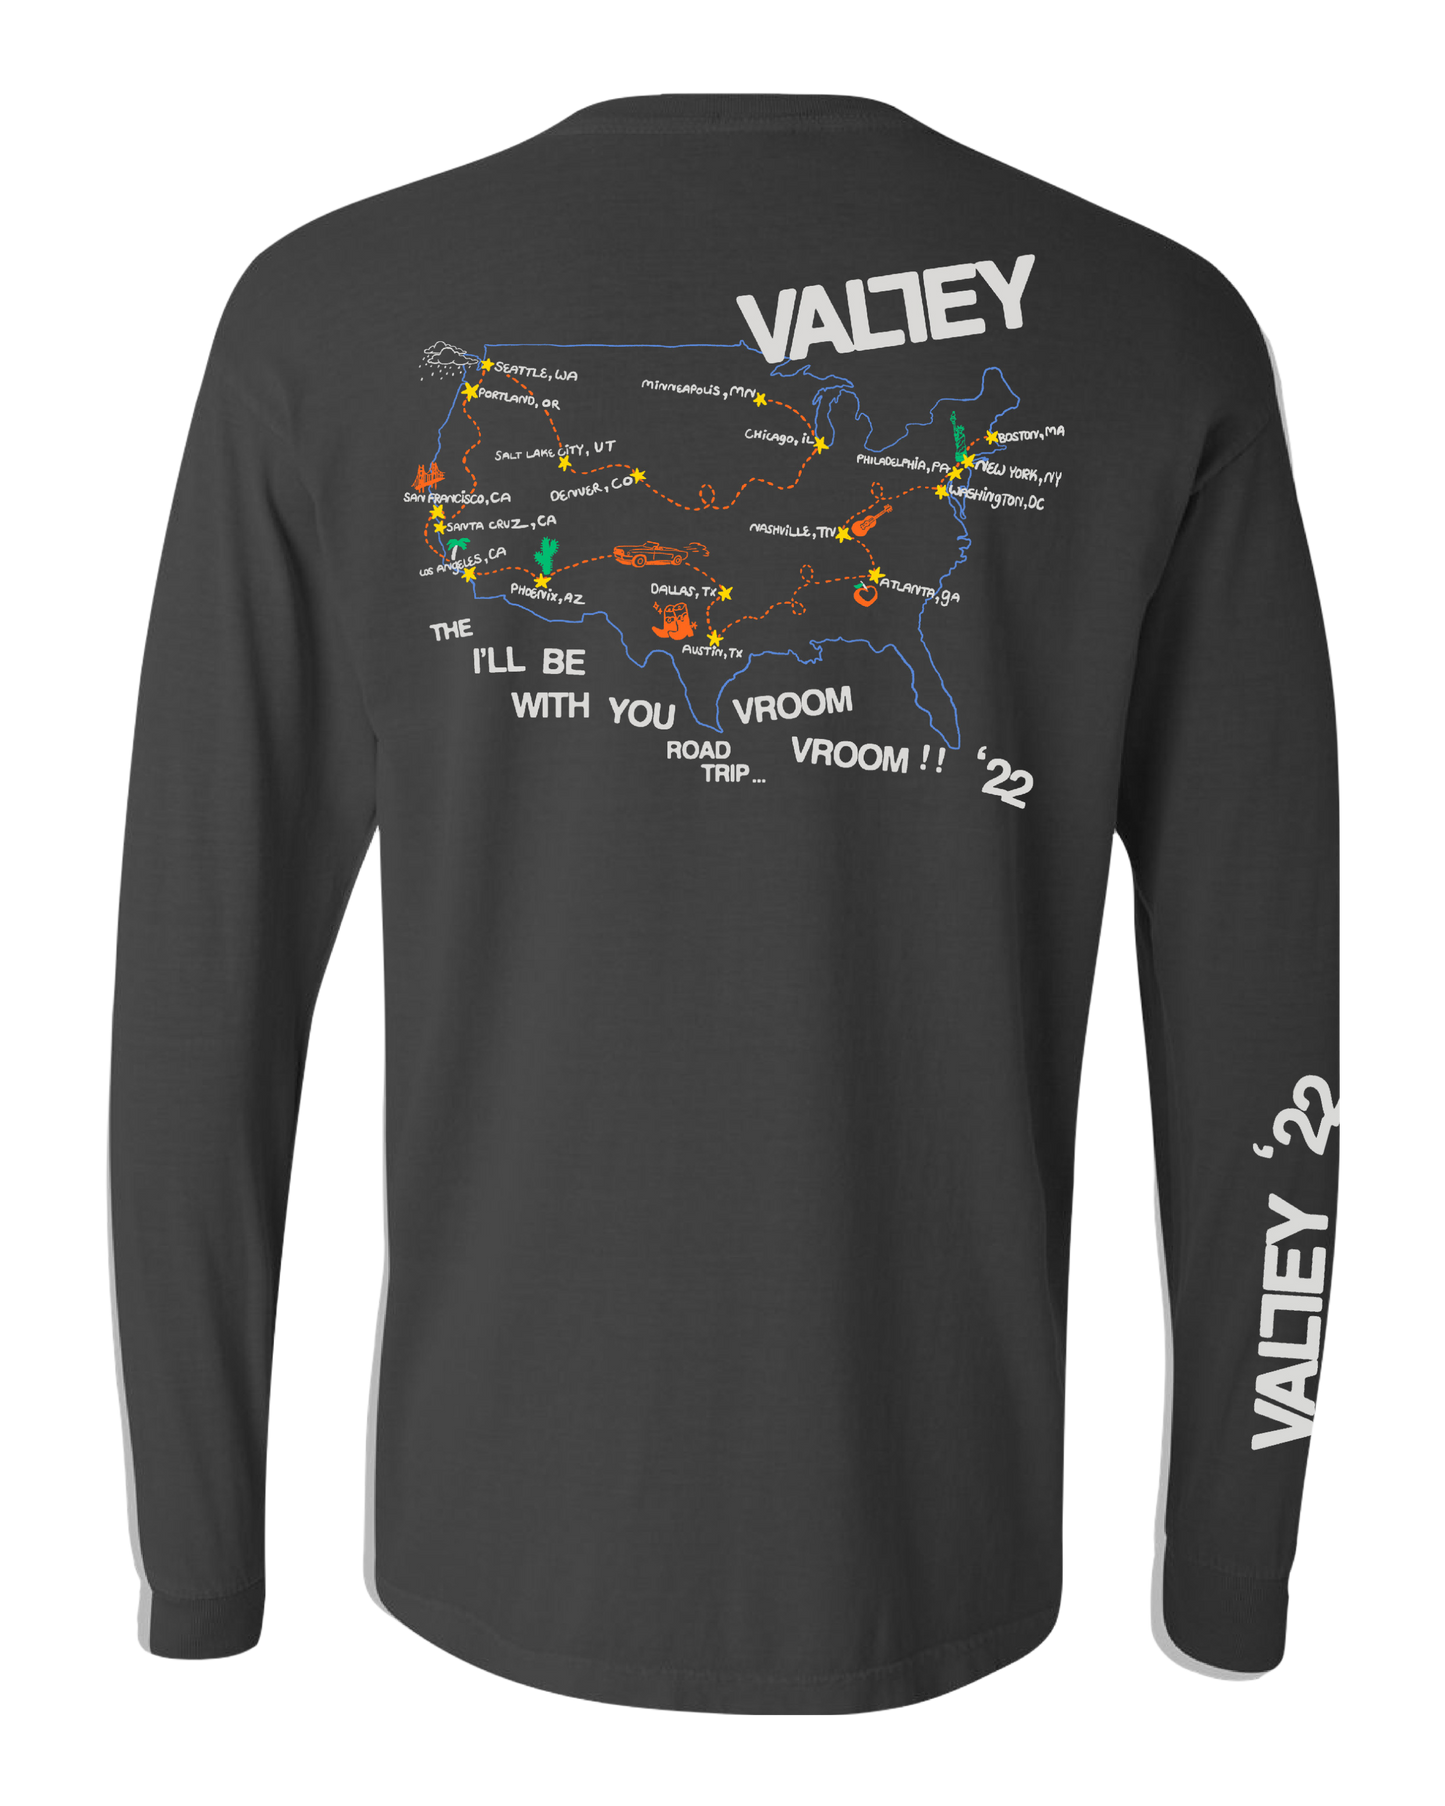 2022 I'll be with you tour photo long sleeve black tee bag map Valley